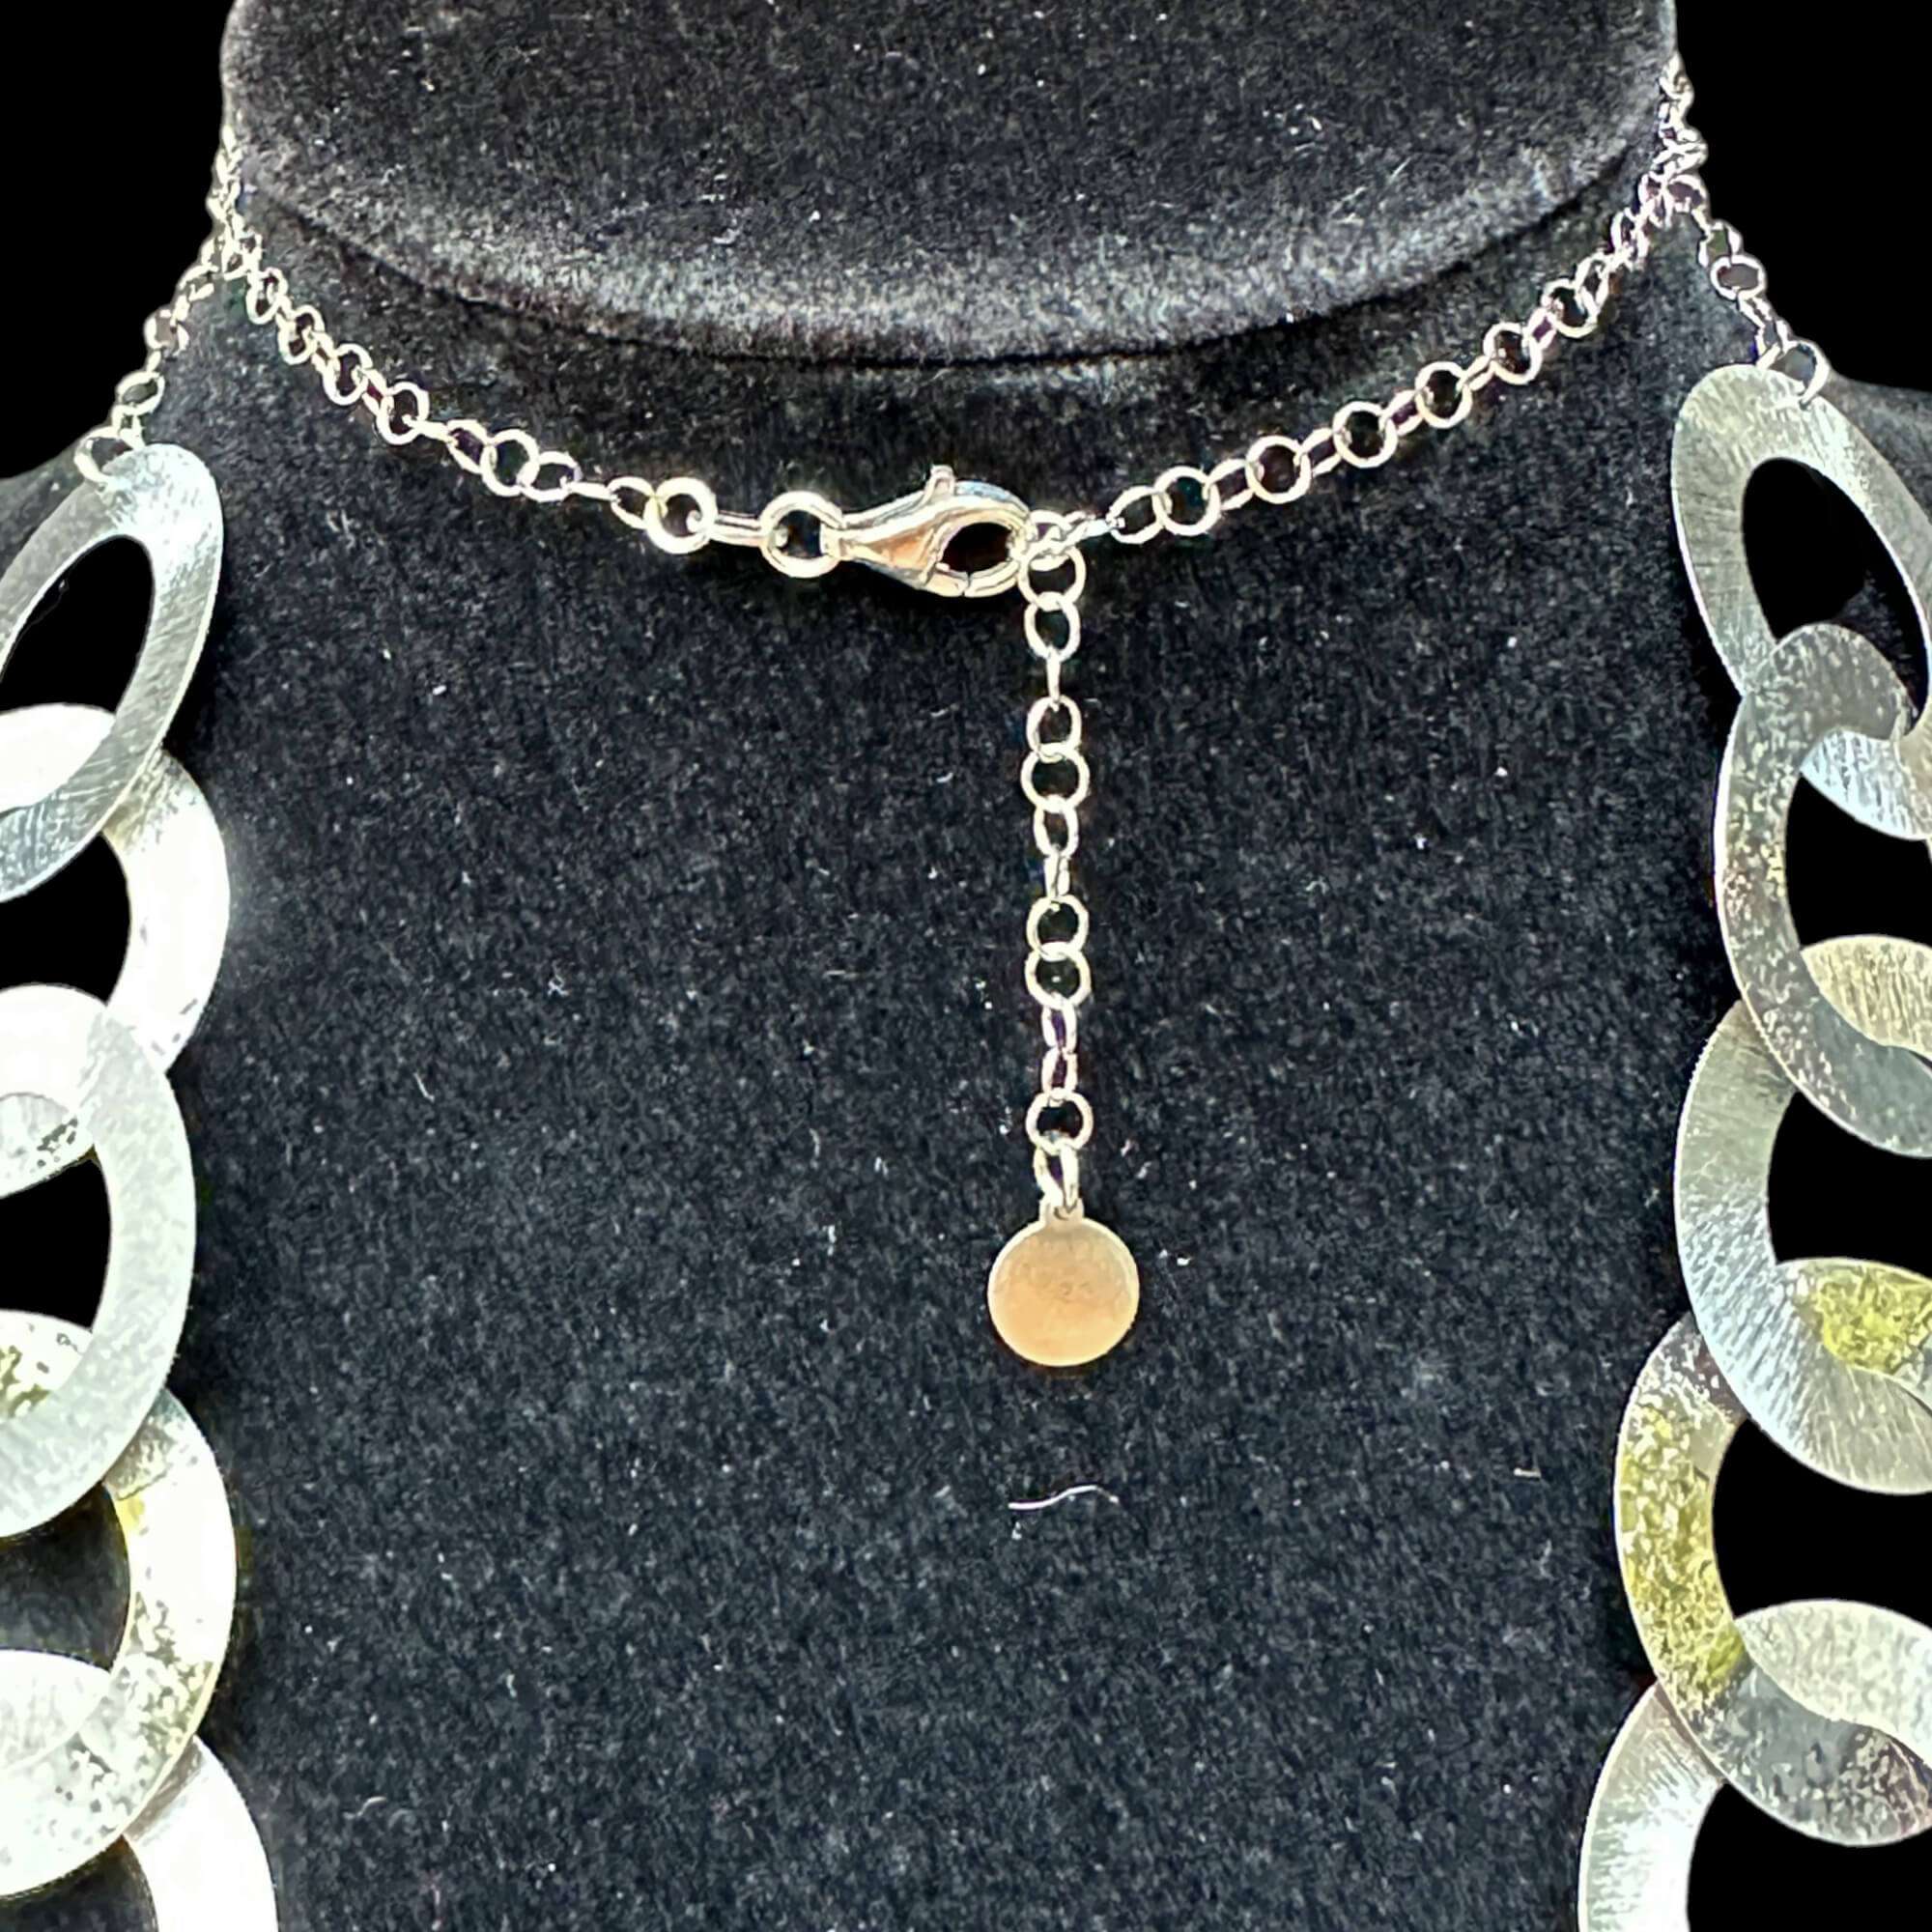 Long silver necklace with circular links